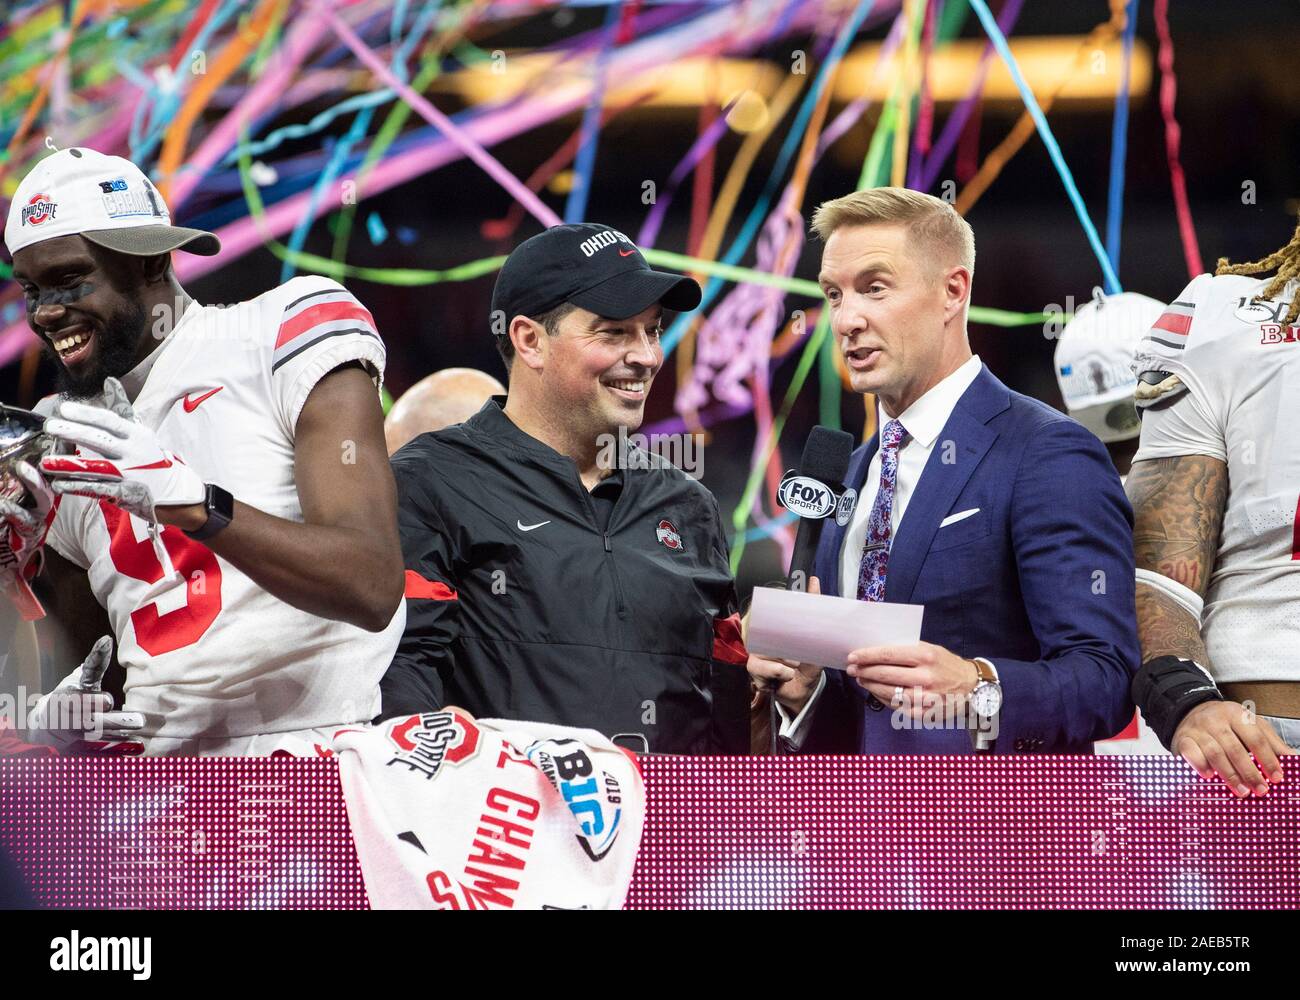 Indianapolis, Indiana, USA. 07th Dec, 2019. Ohio State head coach Ryan Day is all smiles at the trophy presentatiion ceremony after NCAA Football game action between the Ohio State Buckeyes and the Wisconsin Badgers at Lucas Oil Stadium in Indianapolis, Indiana. Ohio State defeated Wisconsin 34-21. John Mersits/CSM/Alamy Live News Stock Photo